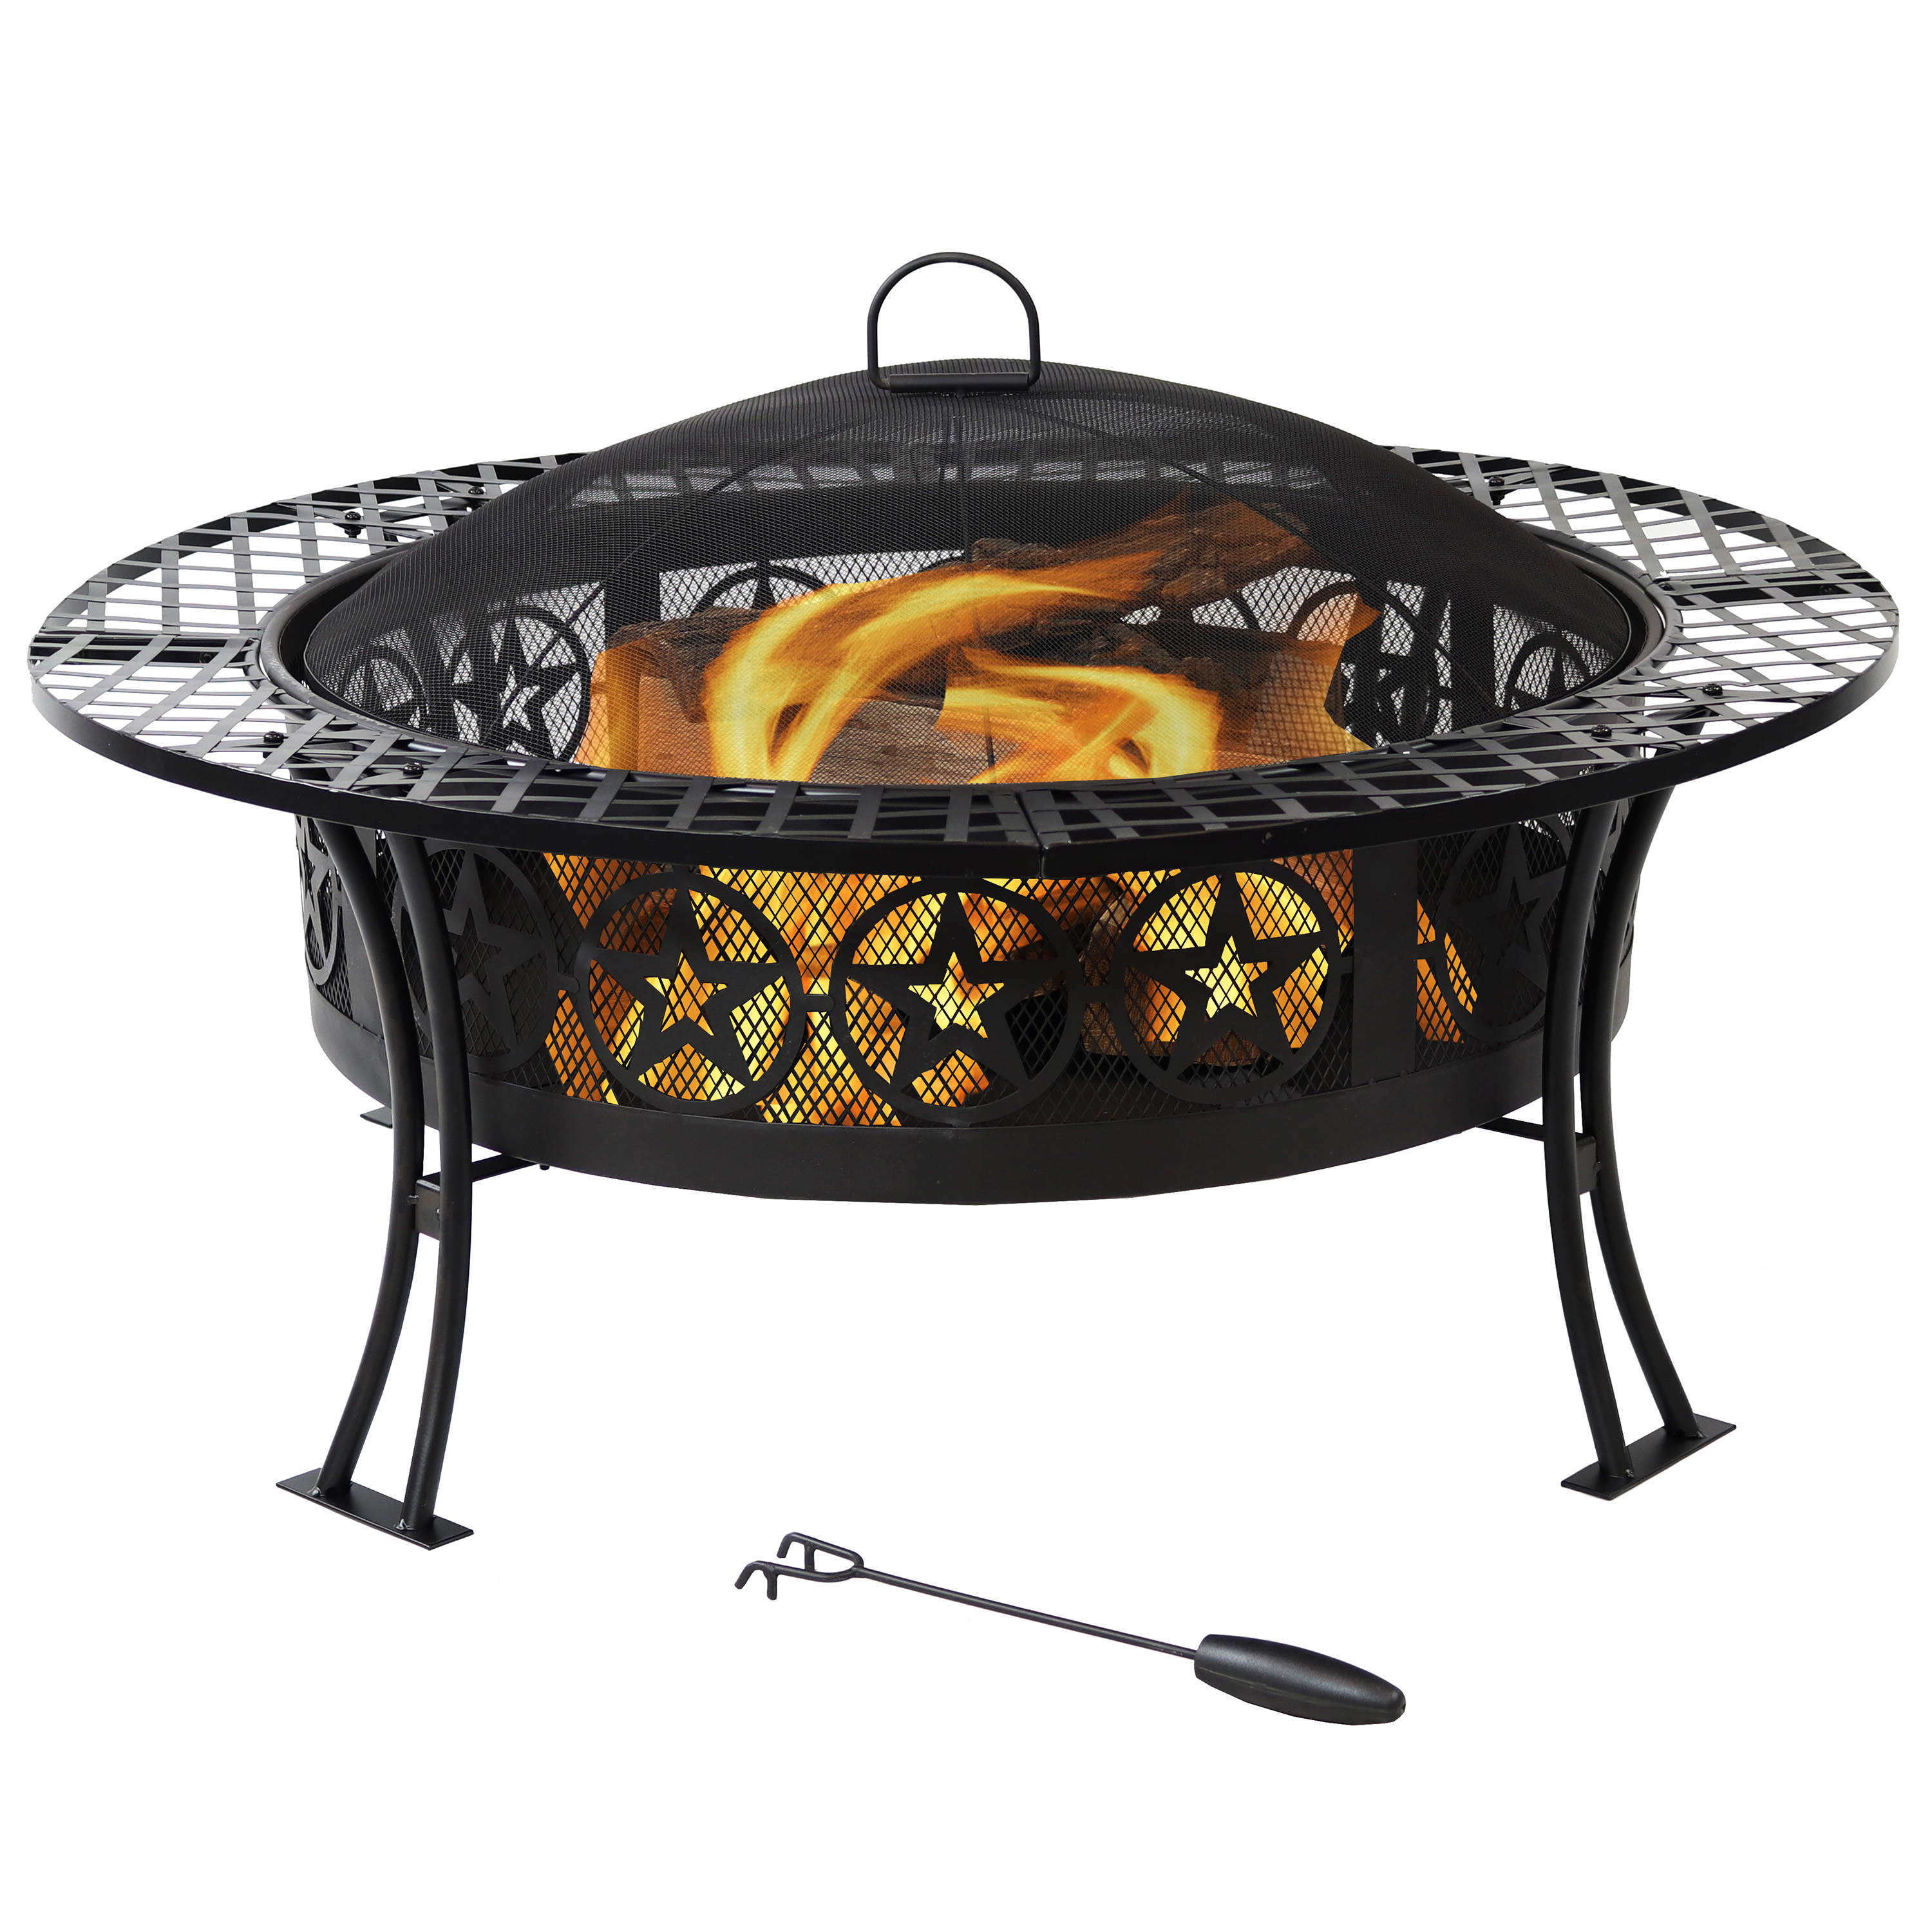 Sunnydaze Four Star Large Fire Pit Table with Spark Screen - 40-Inch